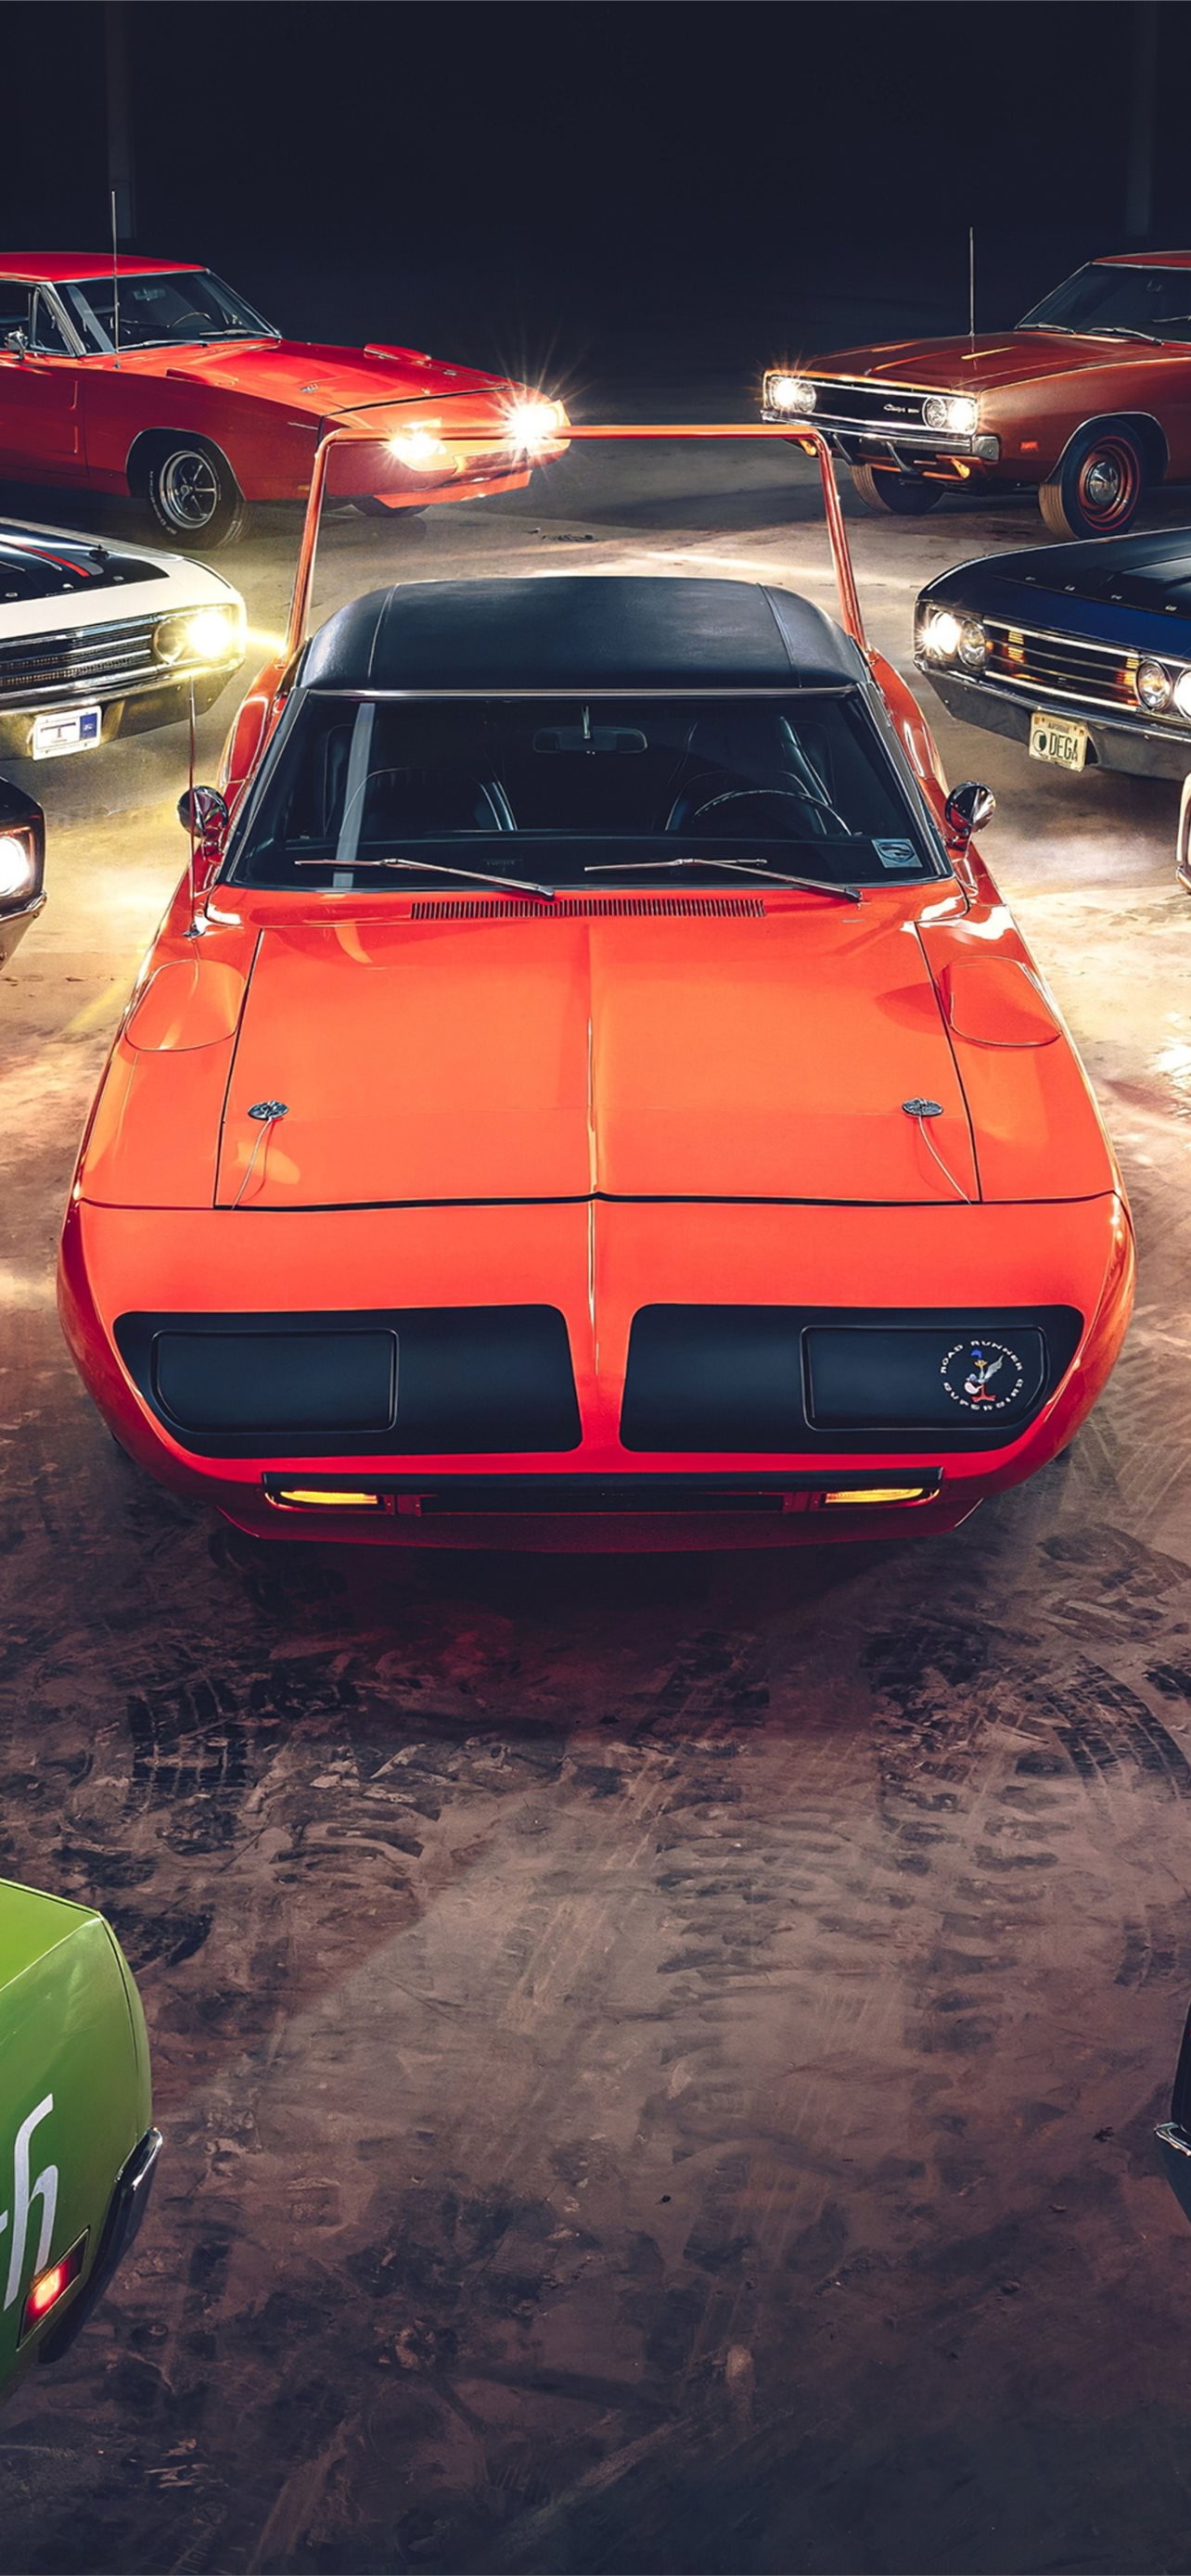 Dodge Charger, Iconic classic, iPhone wallpapers, Free download, 1290x2780 HD Phone